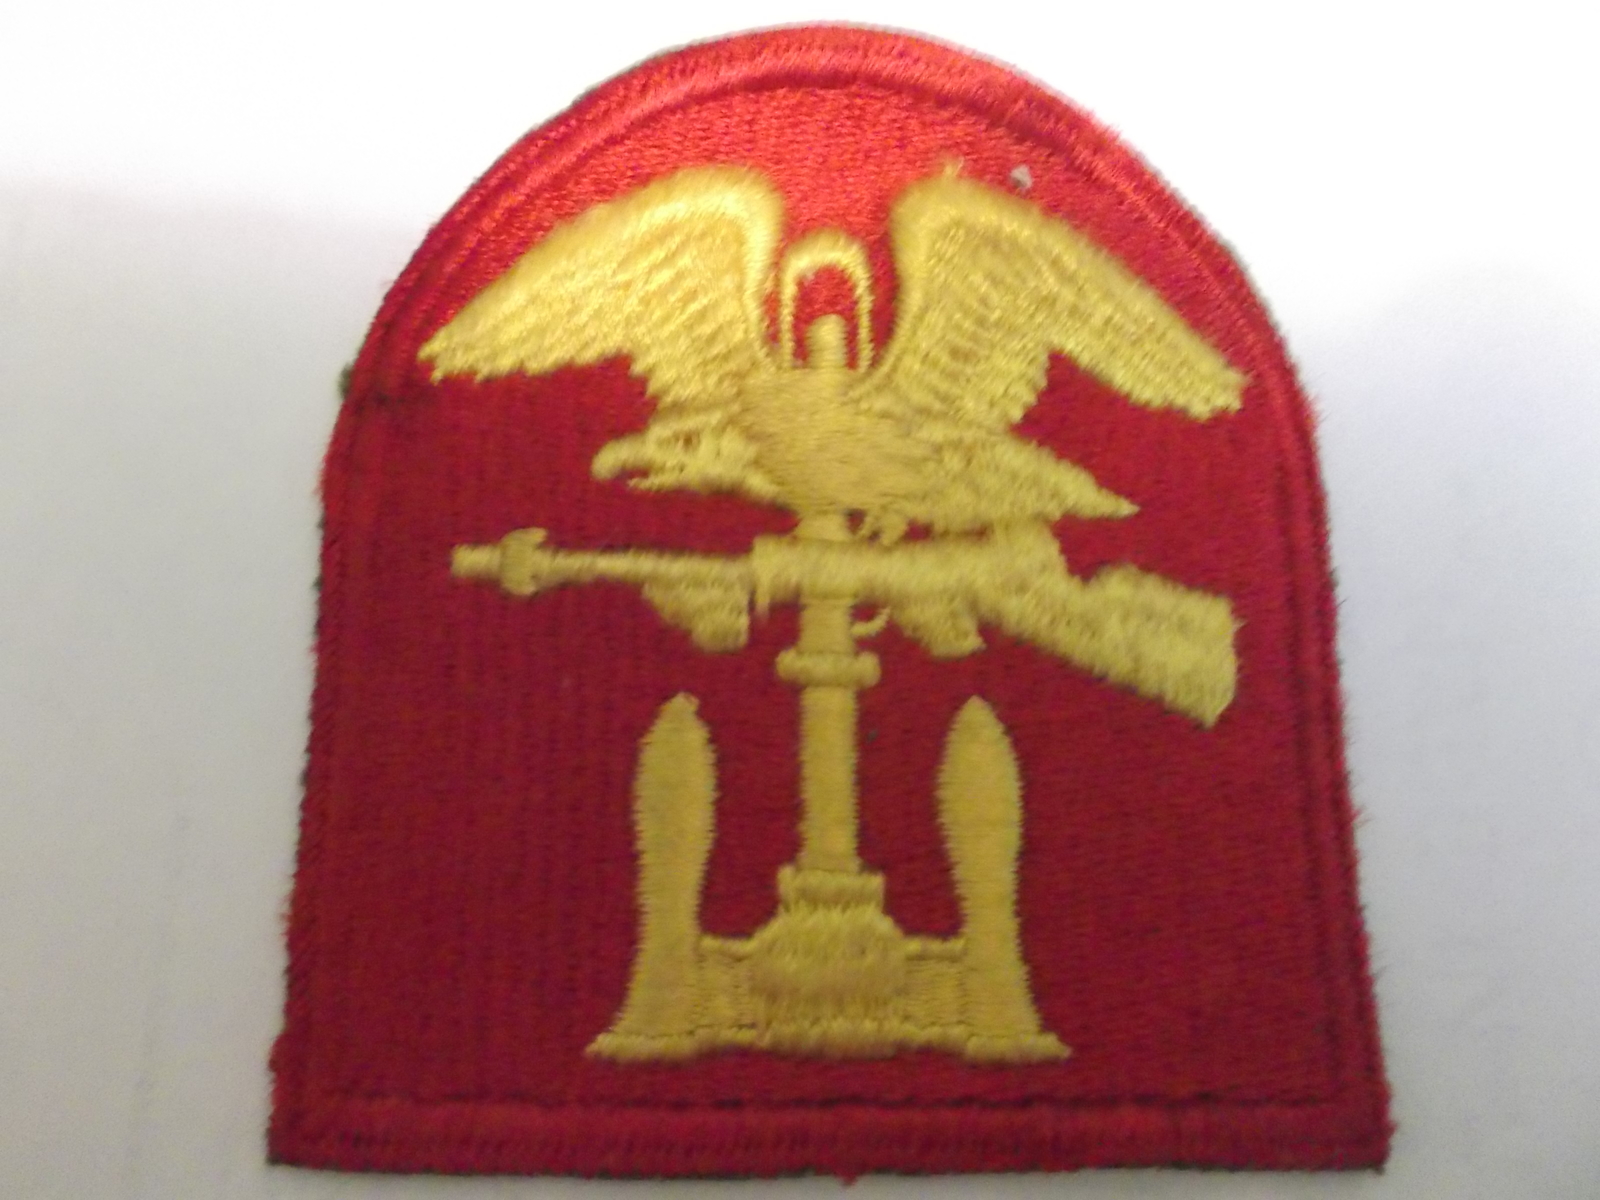 WWII Military Uniform Patch in Red with Gold Eagle and Rifle - $15.00